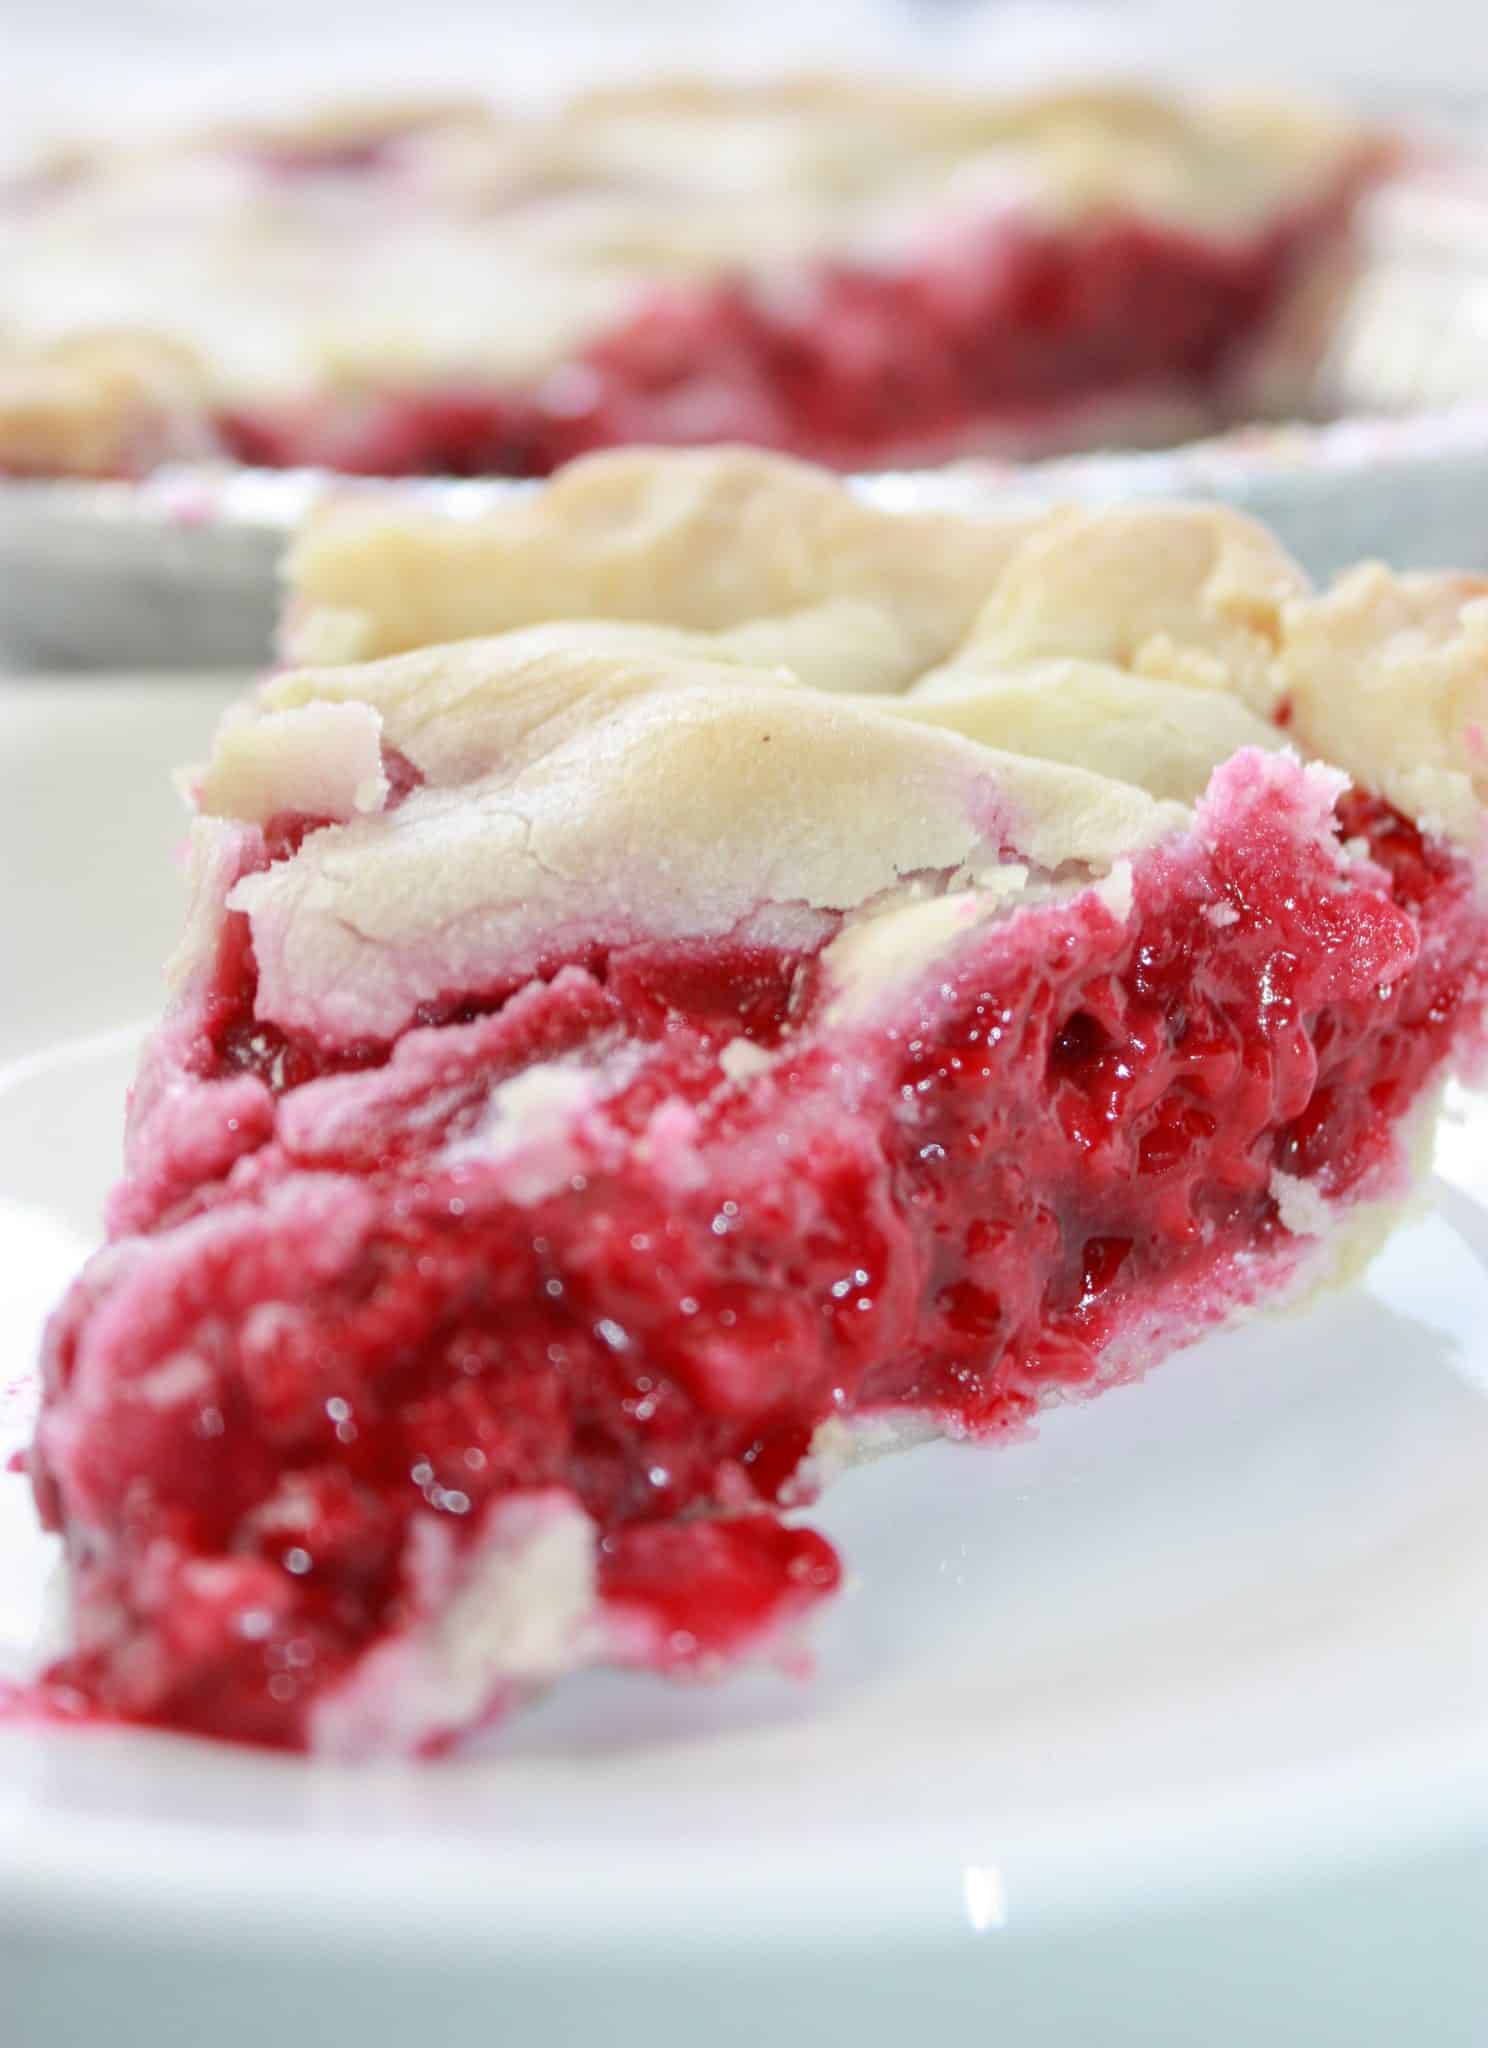 Raspberry Pie is a popular baking creation in our family.  This easy, gluten free, fruit filled dessert can be a great finish to a family meal.